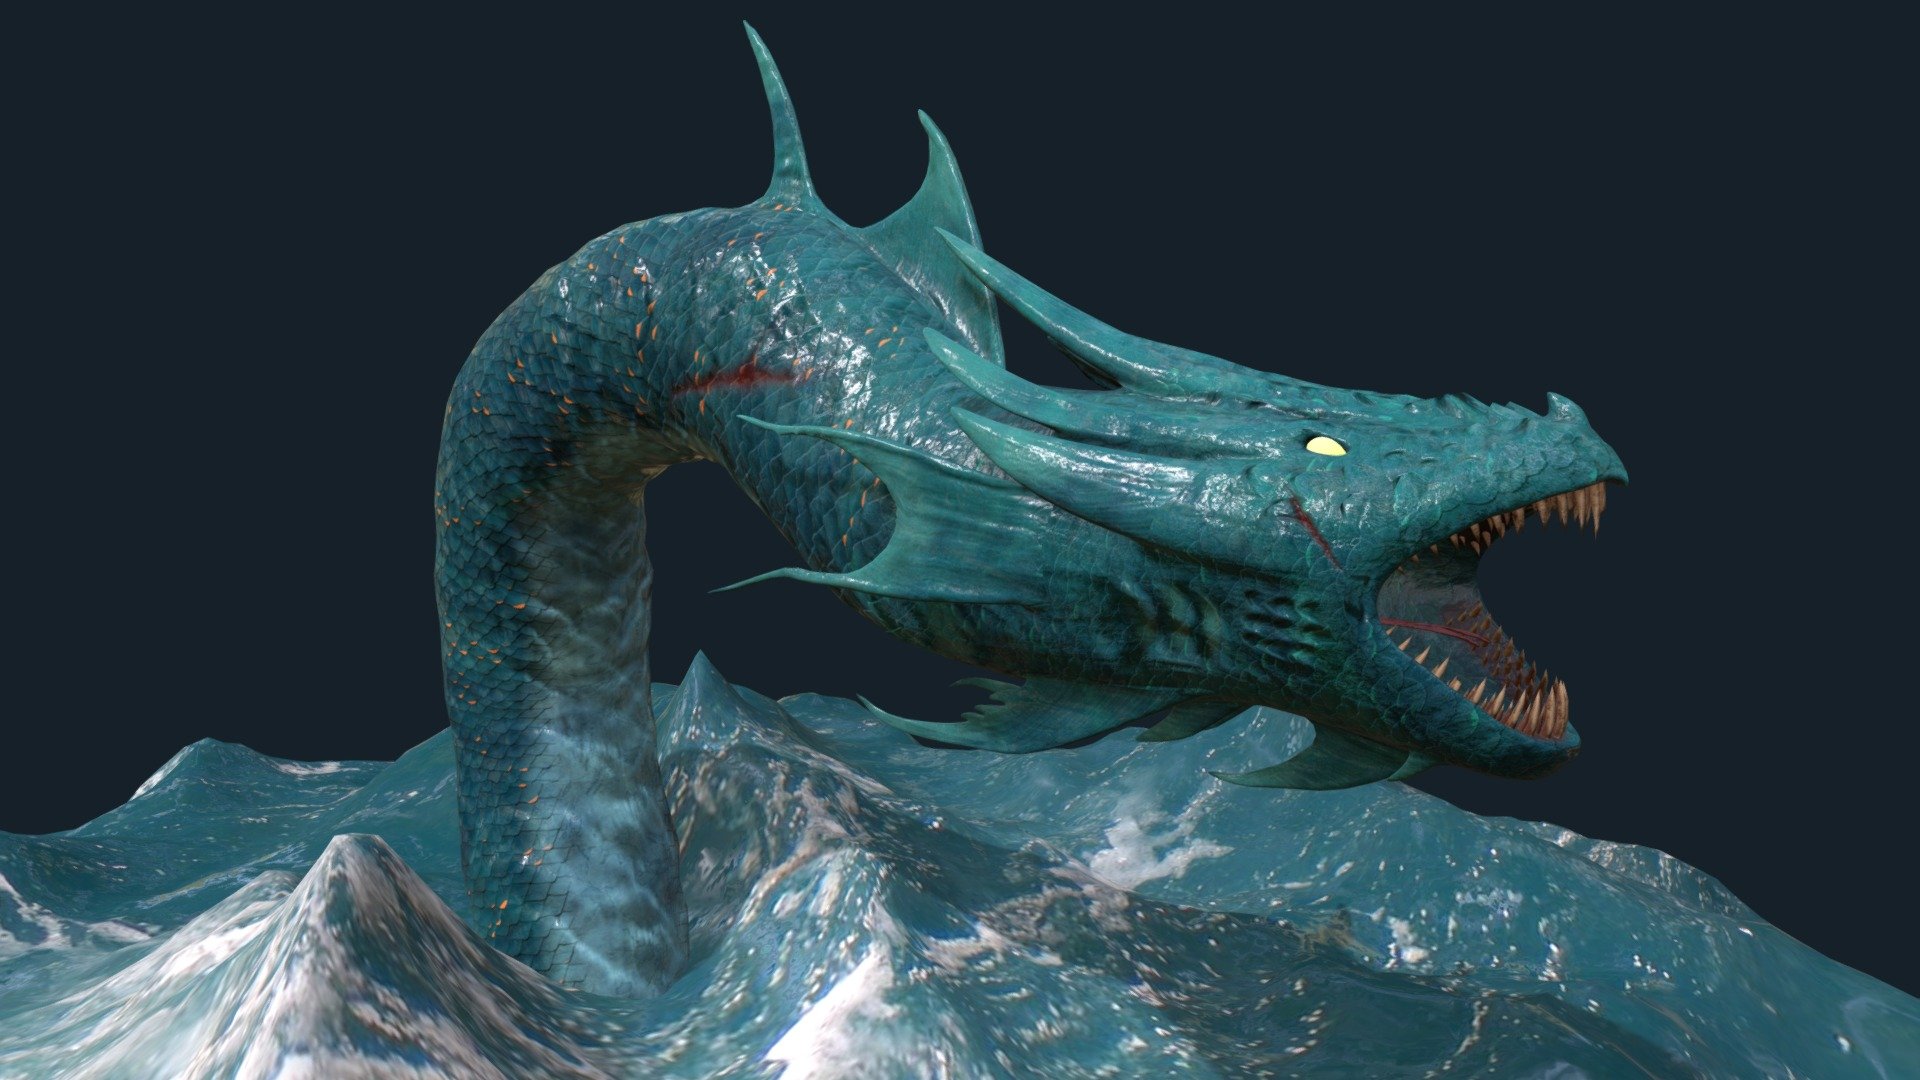 Behold the mighty Leviathan, the sea dragon ready to eat you like a fish!

Modeled/sculpted in Blender and textured in Substance Painter 3d model